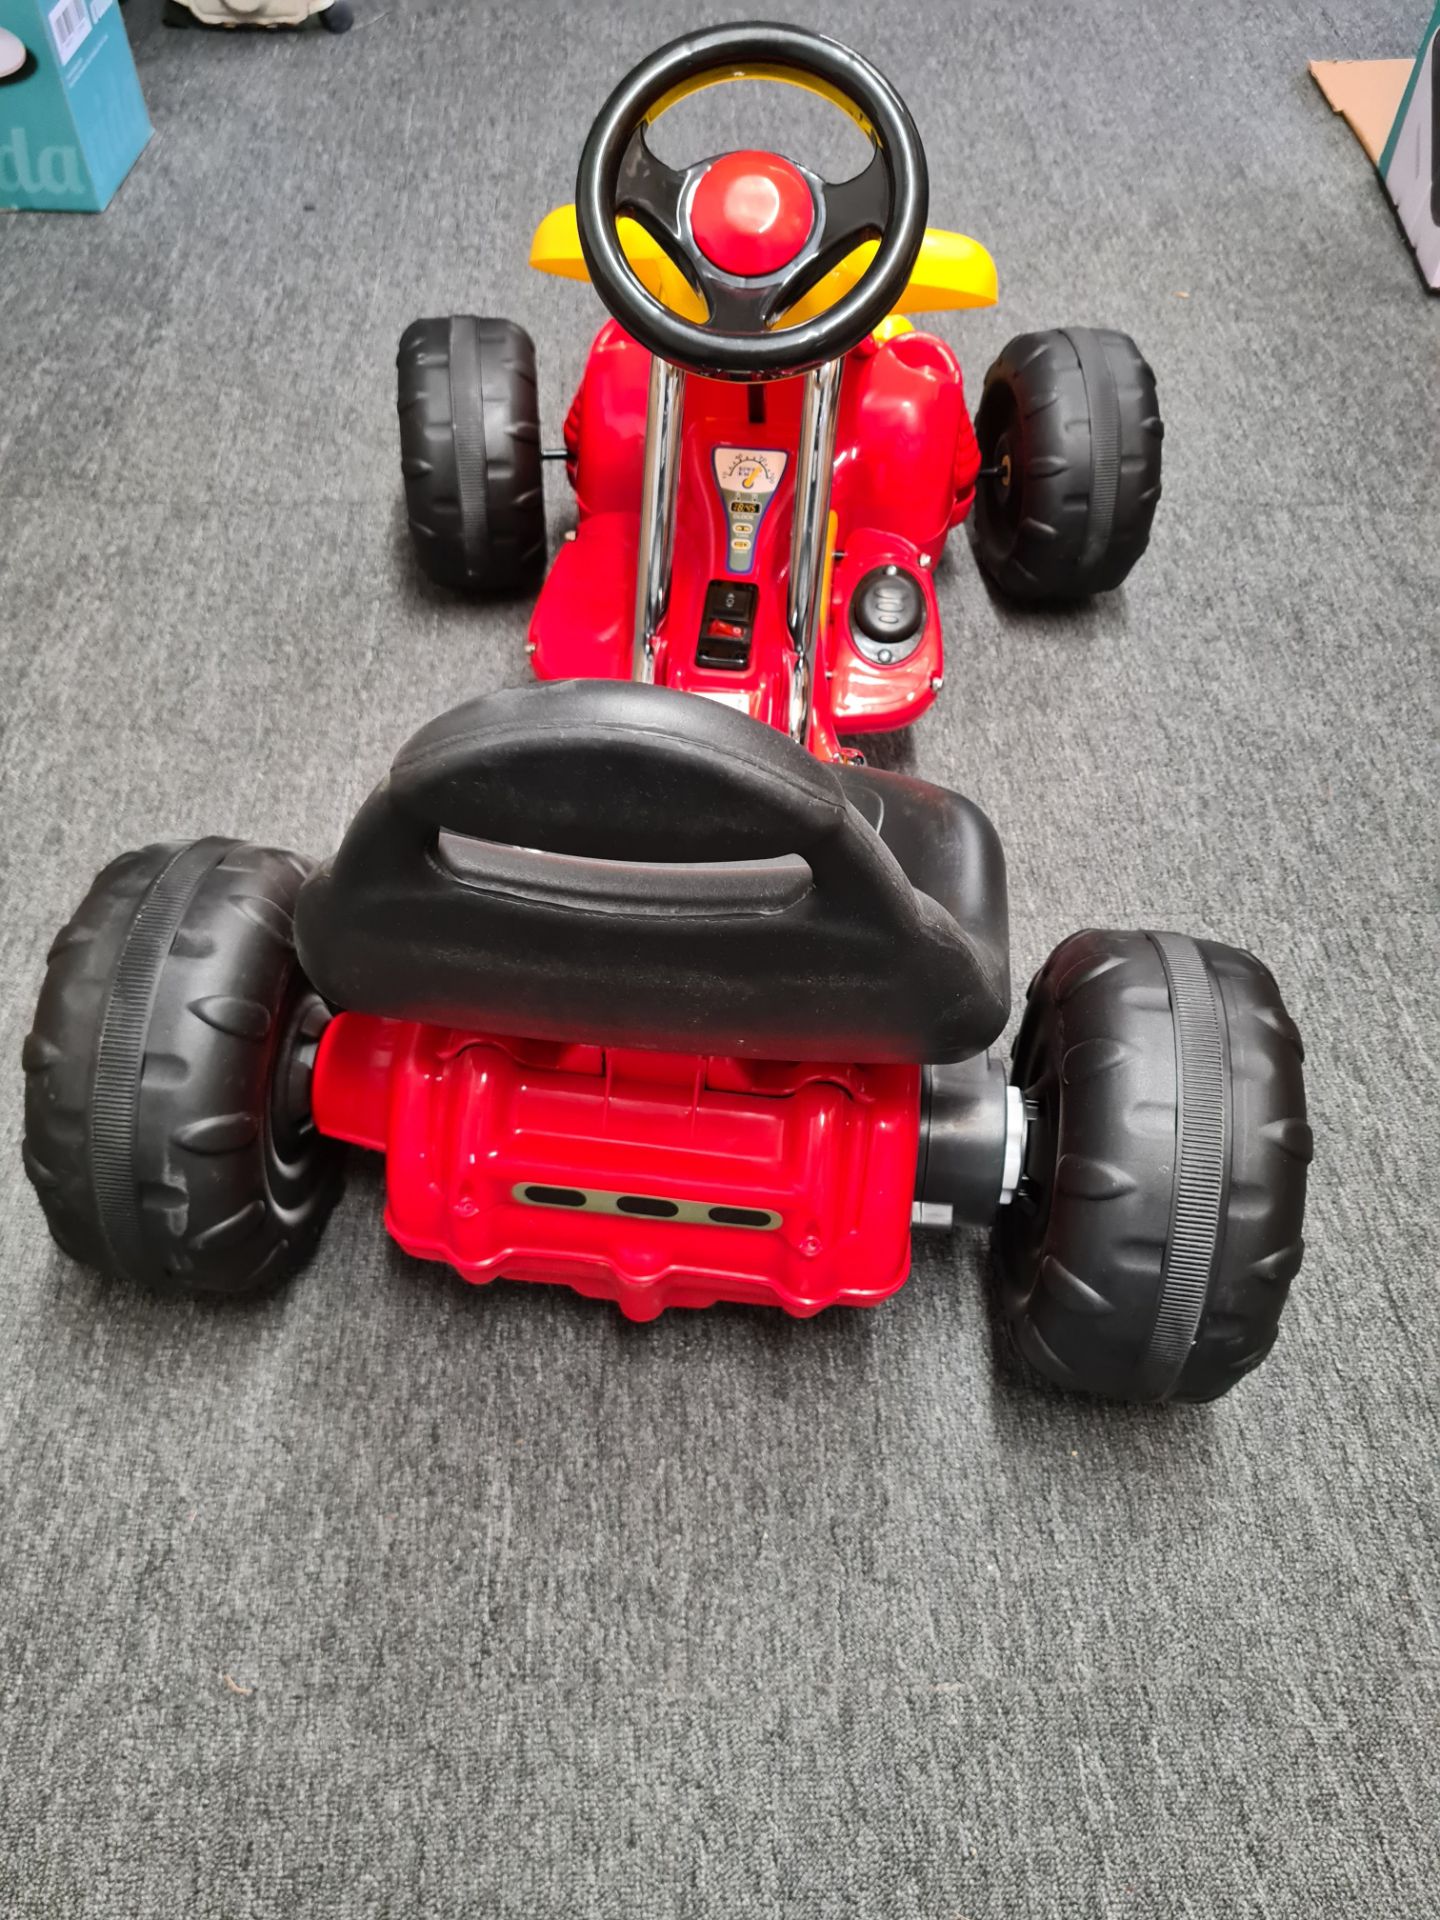 10 X ELECTRIC 6V RIDE ON GO KART - RED / YELLOW £1500 - BRAND NEW FOR KIDS - Image 4 of 10